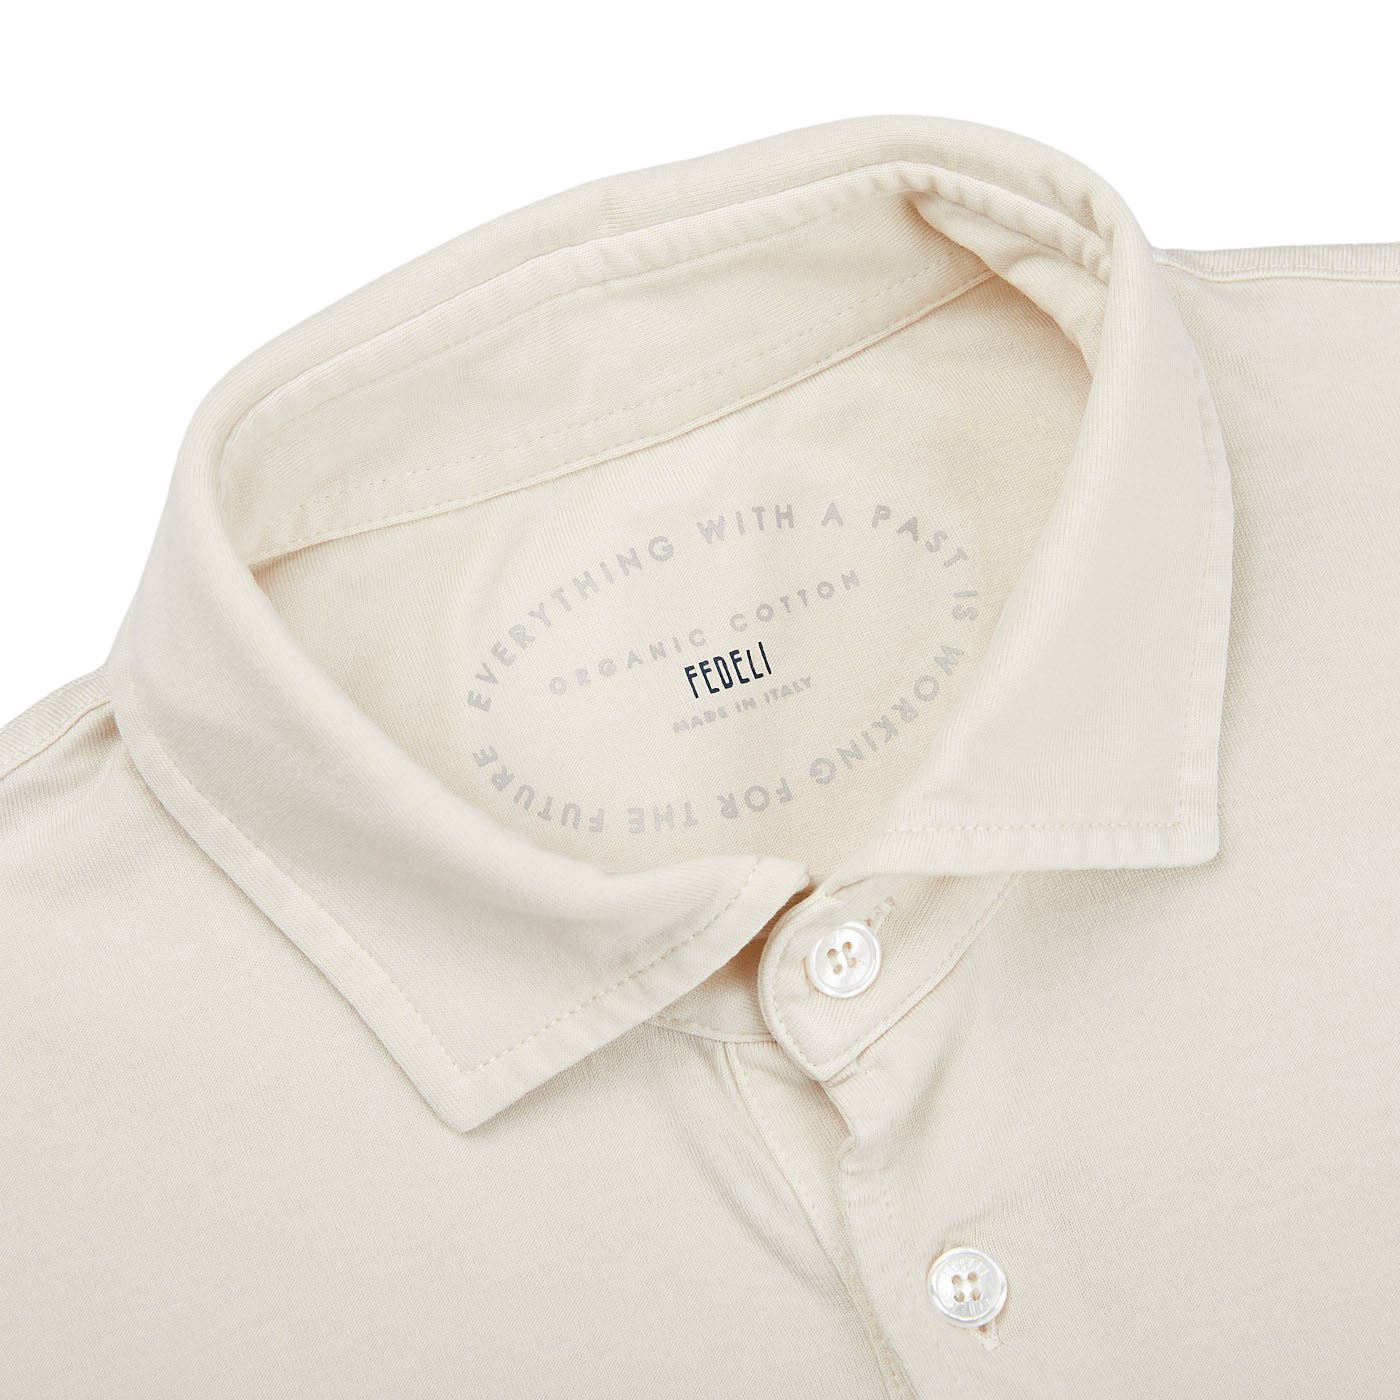 Fedeli, a luxury casual wear producer, crafted the Cream Beige Organic Cotton LS Polo Shirt with an exquisite collar made of organic Giza cotton.